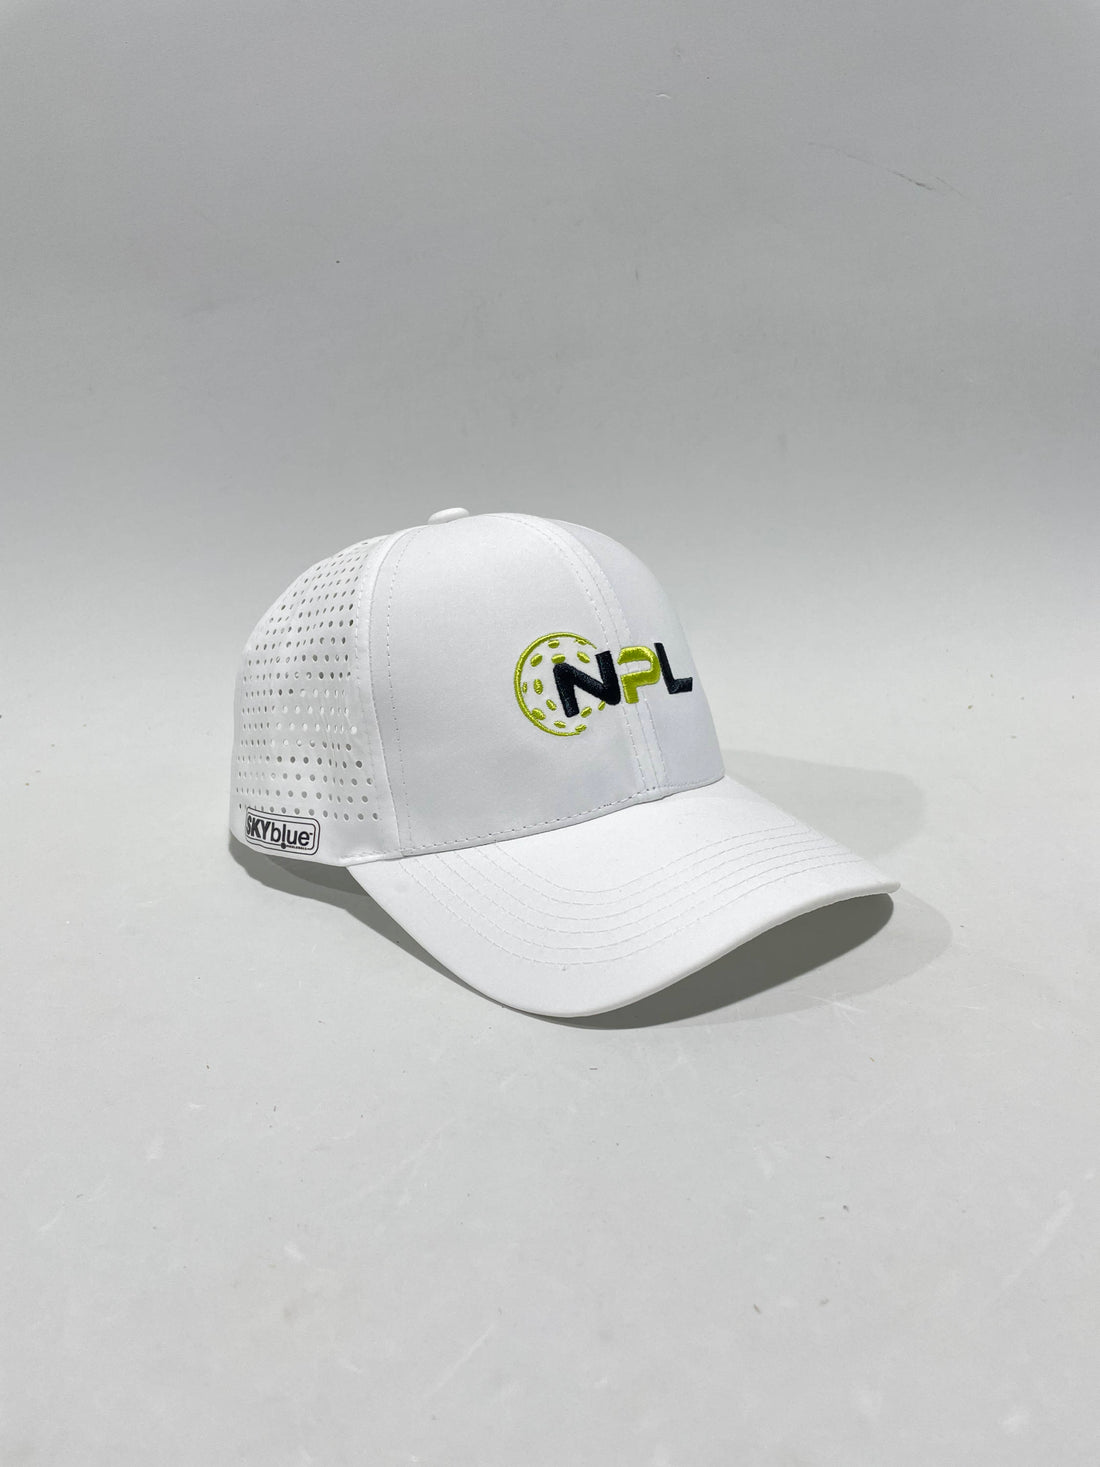 NPL Hat - New - Embroidered - Reinforced front panel - White